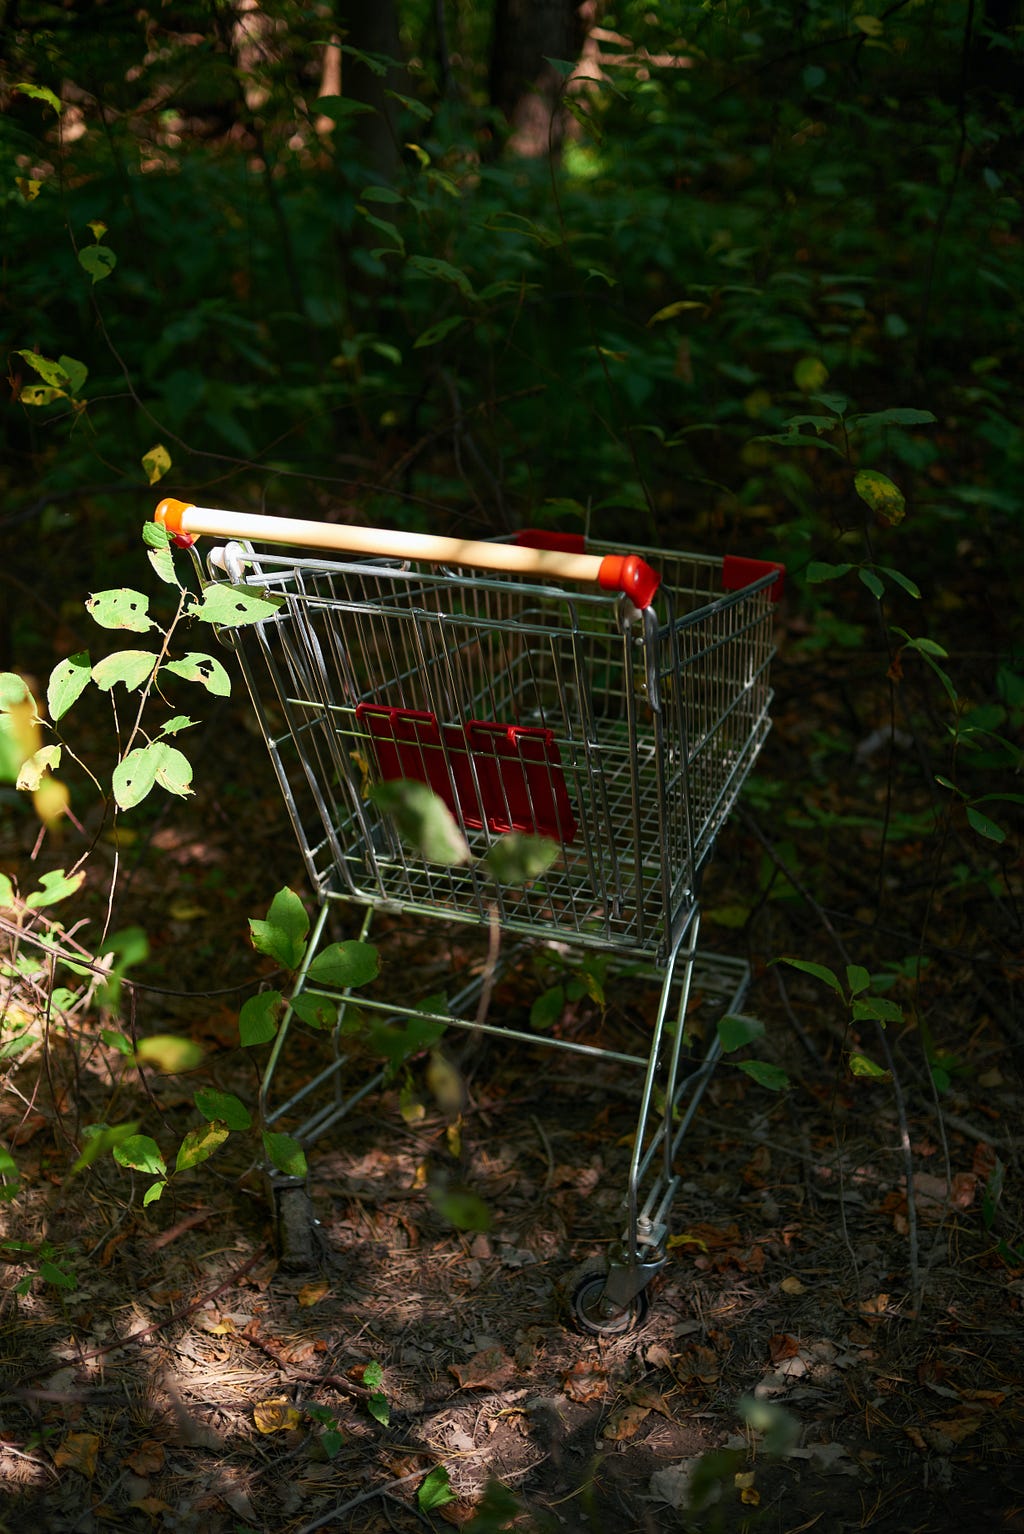 Grocery cart in middle of greenery and tress representing eco-friendly and sustainability.